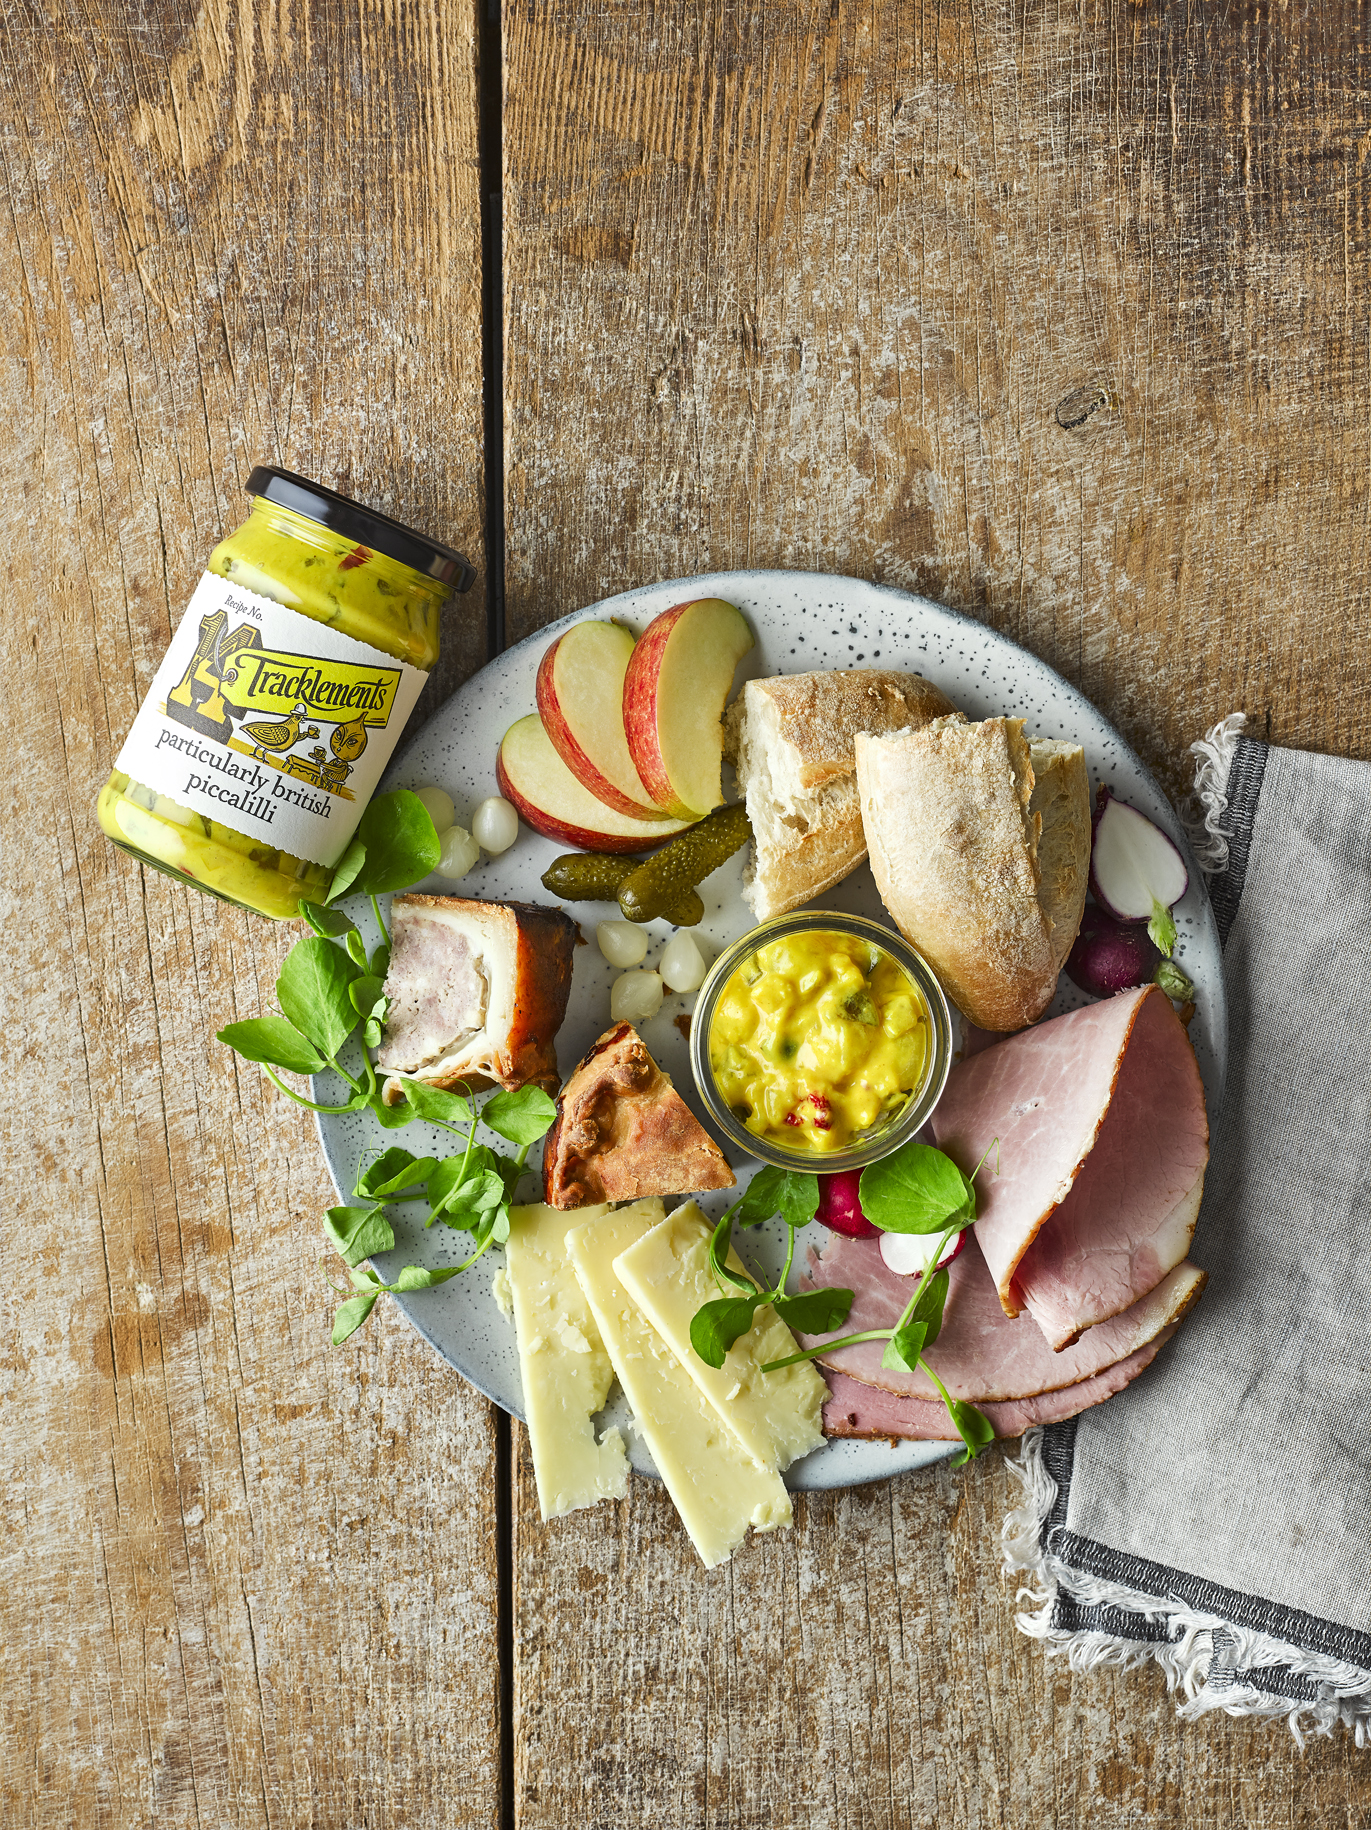 Ploughman's with Particularly British Piccalilli